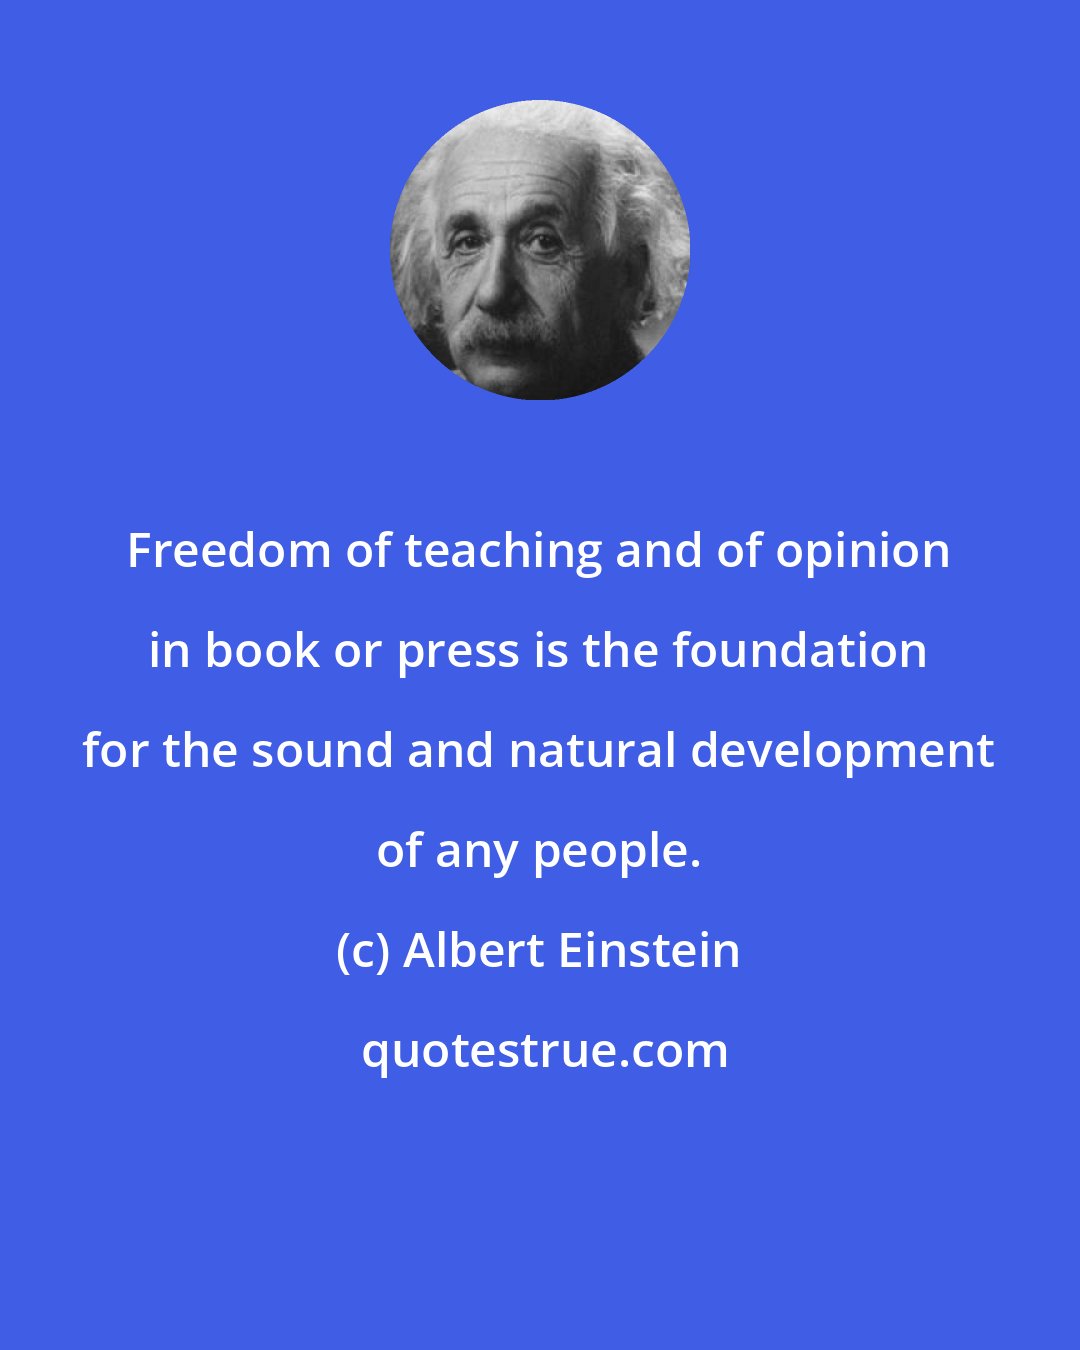 Albert Einstein: Freedom of teaching and of opinion in book or press is the foundation for the sound and natural development of any people.